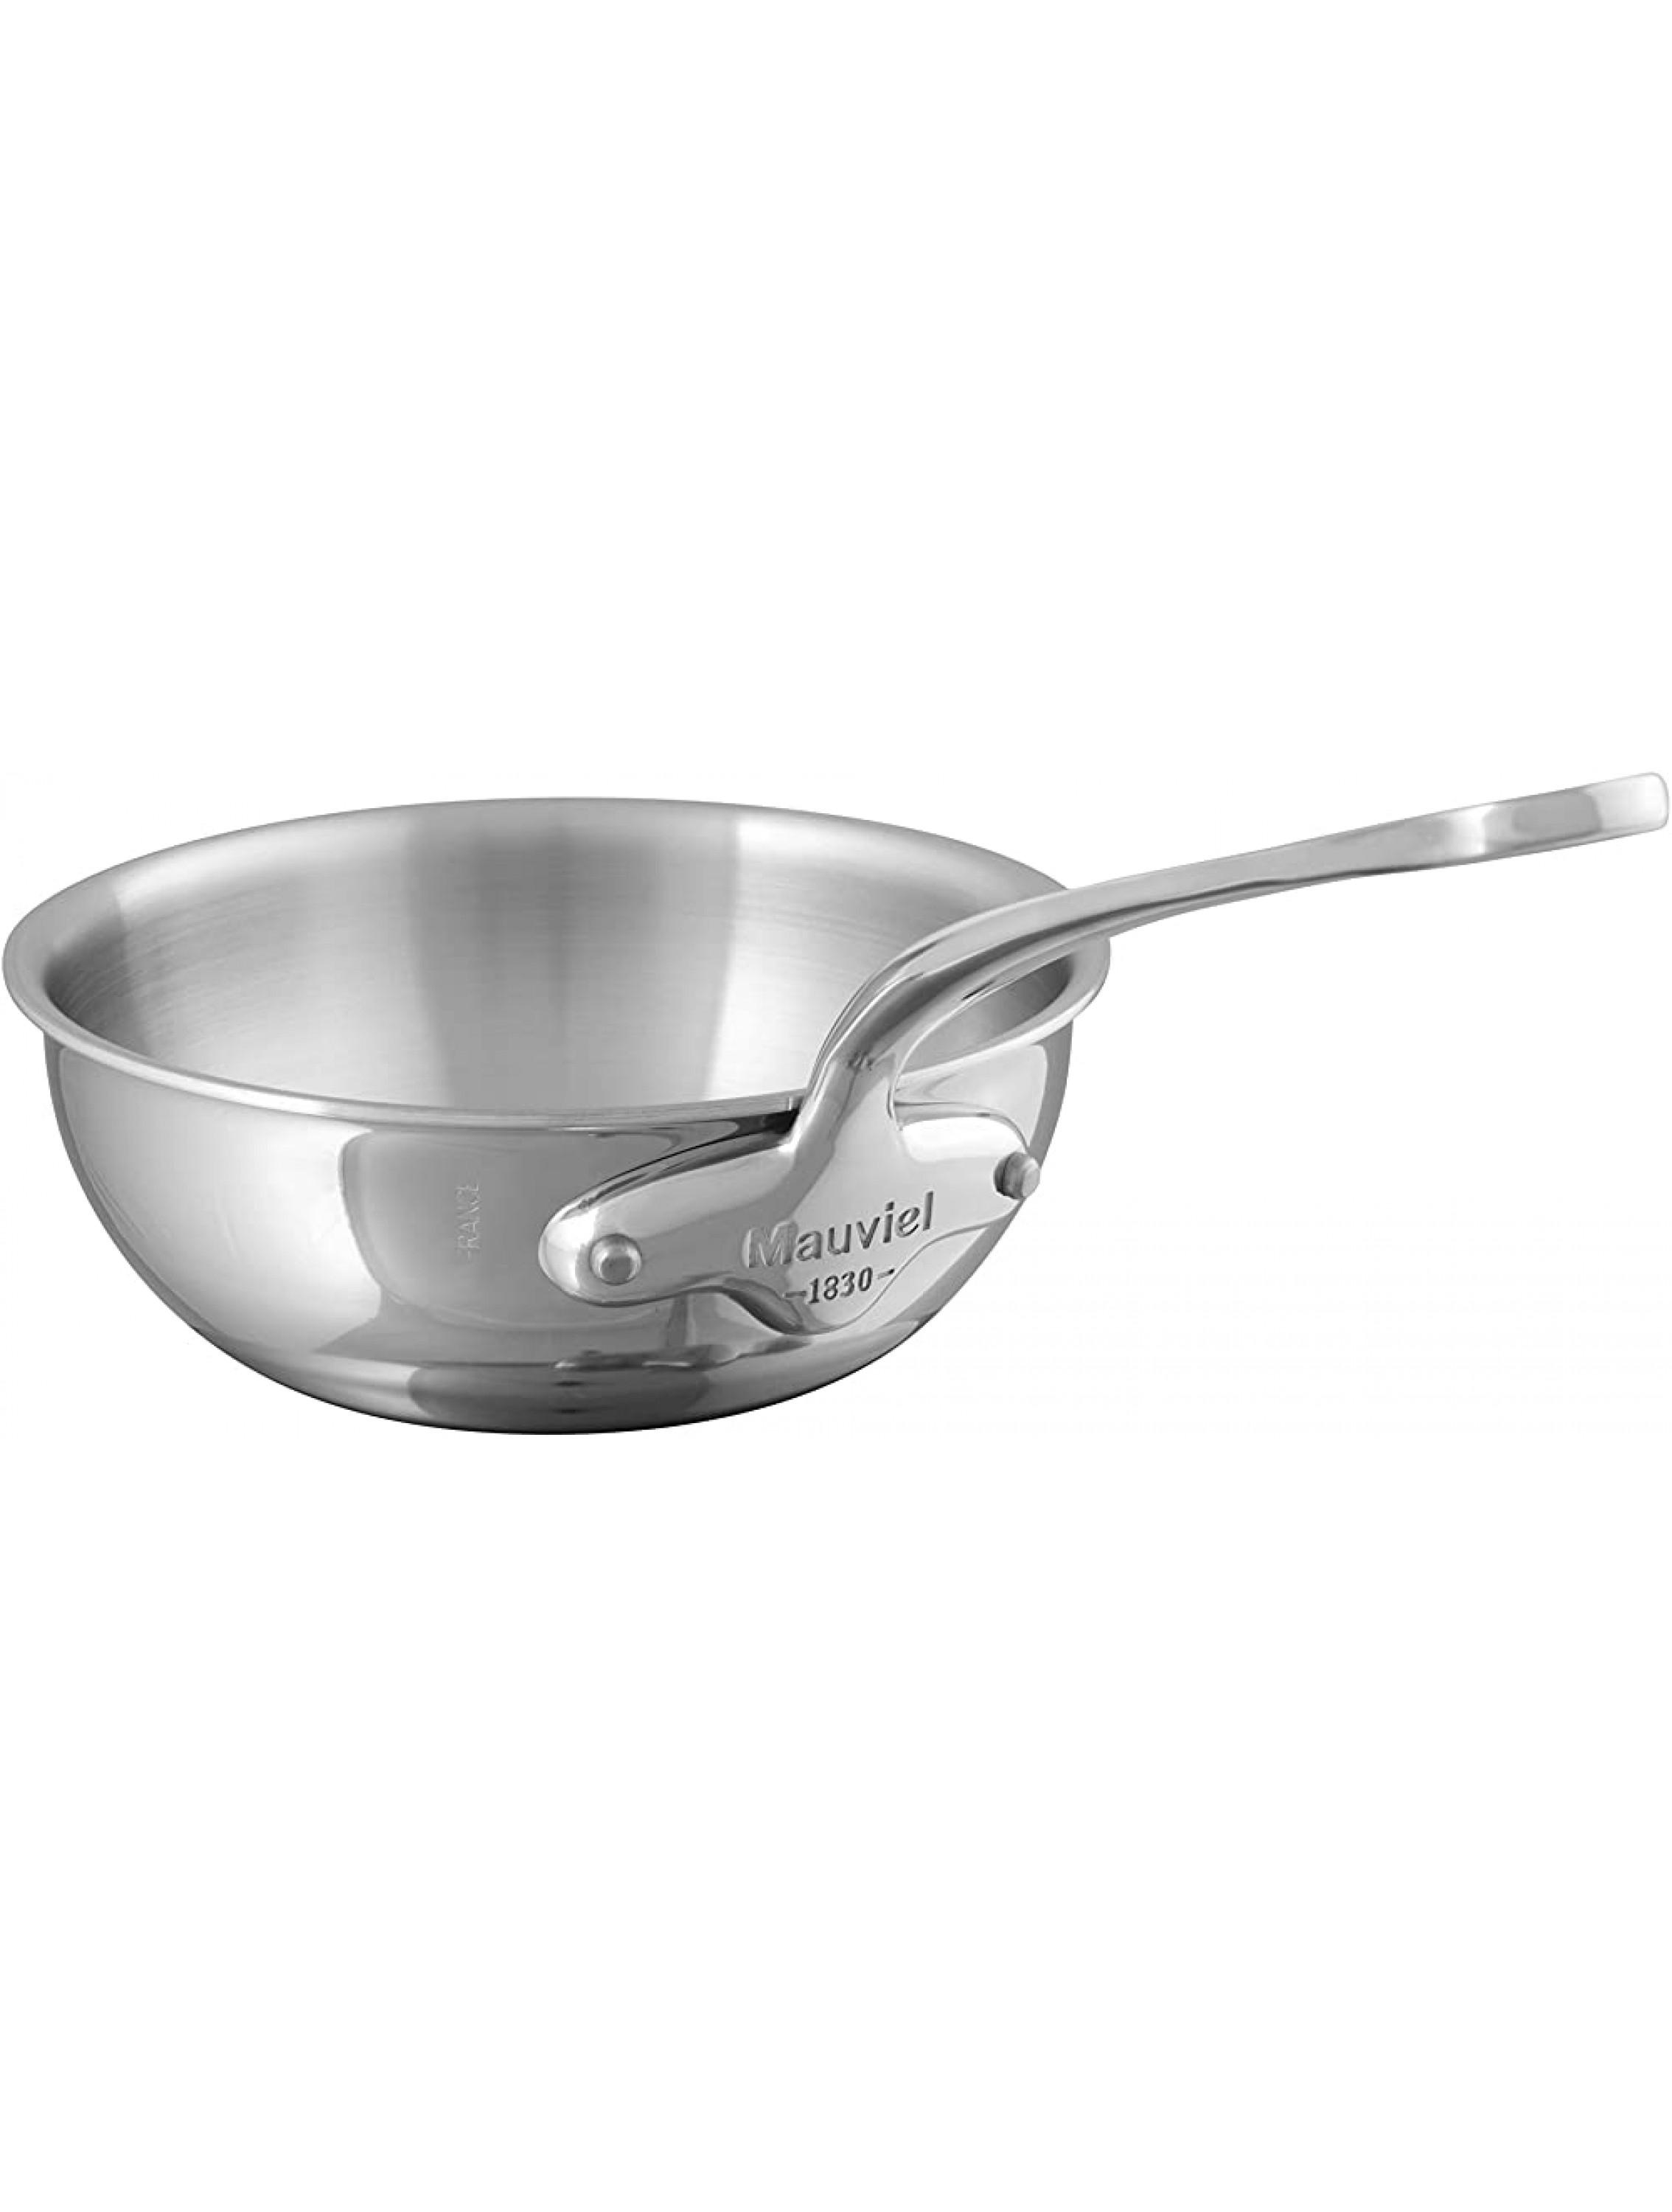 Mauviel M Cook 16CM CAST SS HDL 2.6MM Curved splayed Saute pan 16 Stainless Steel - BQZX17EHD